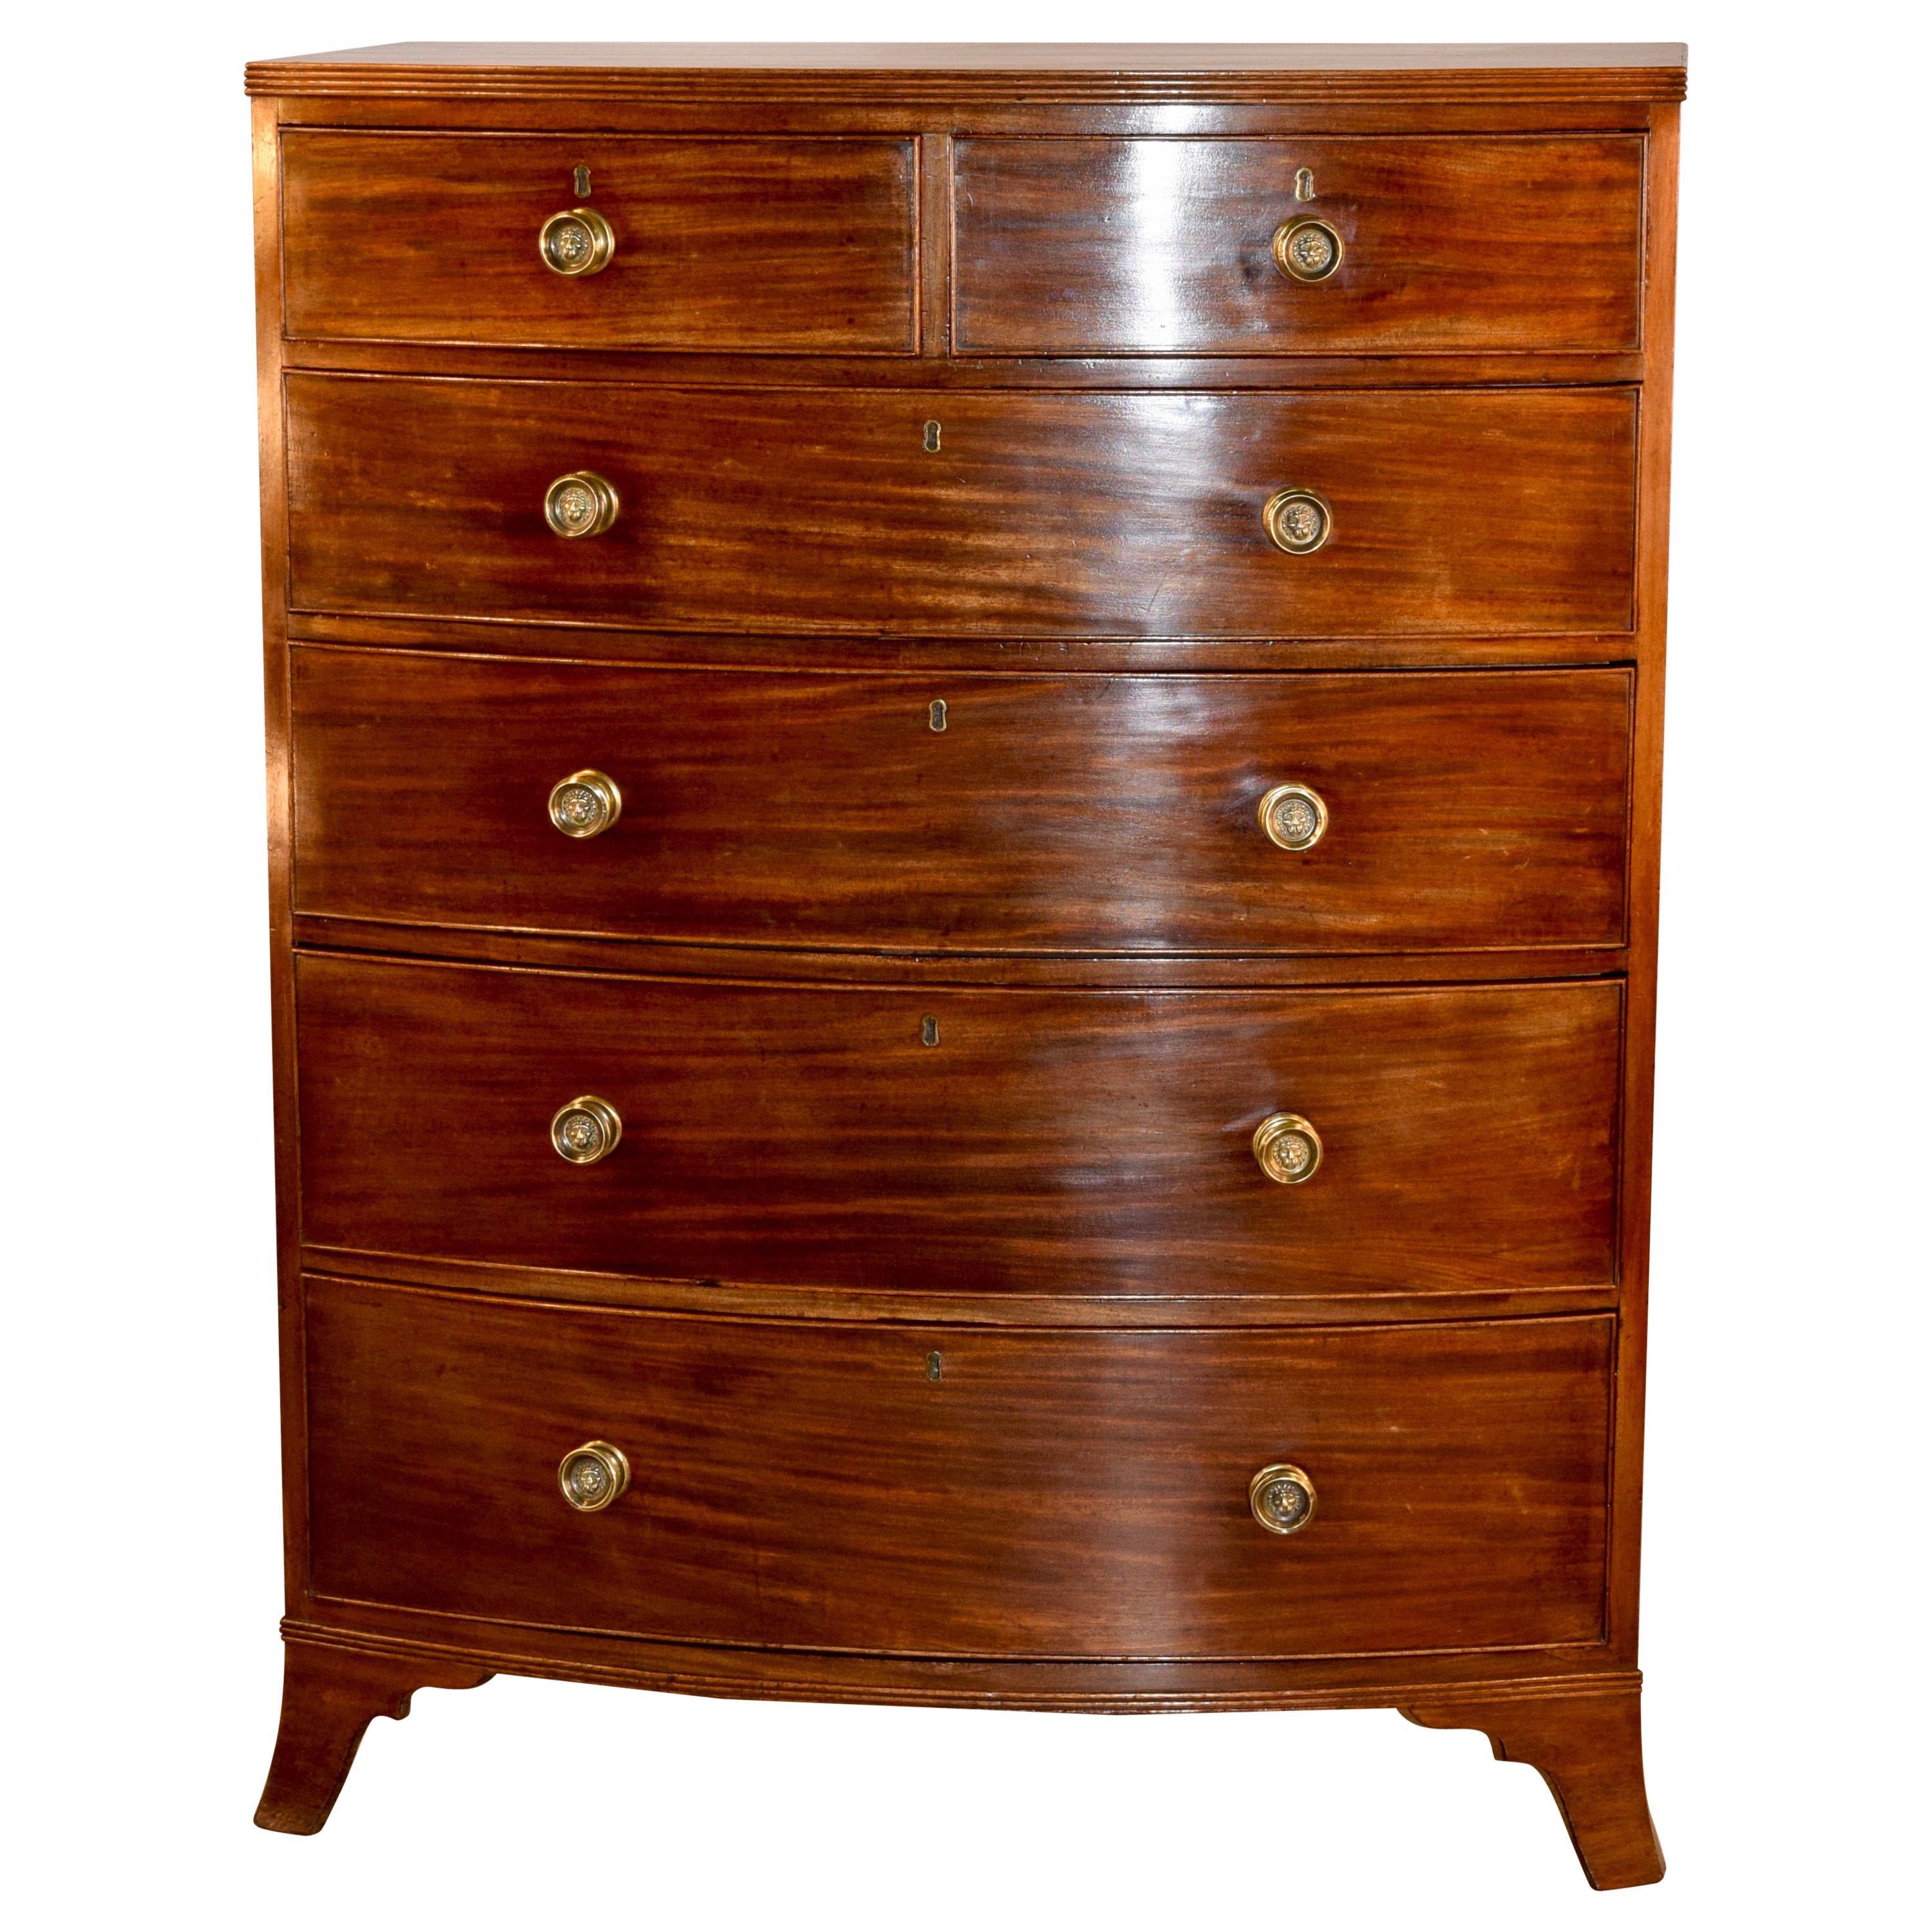 19th Century Tall Mahogany Chest of Drawers